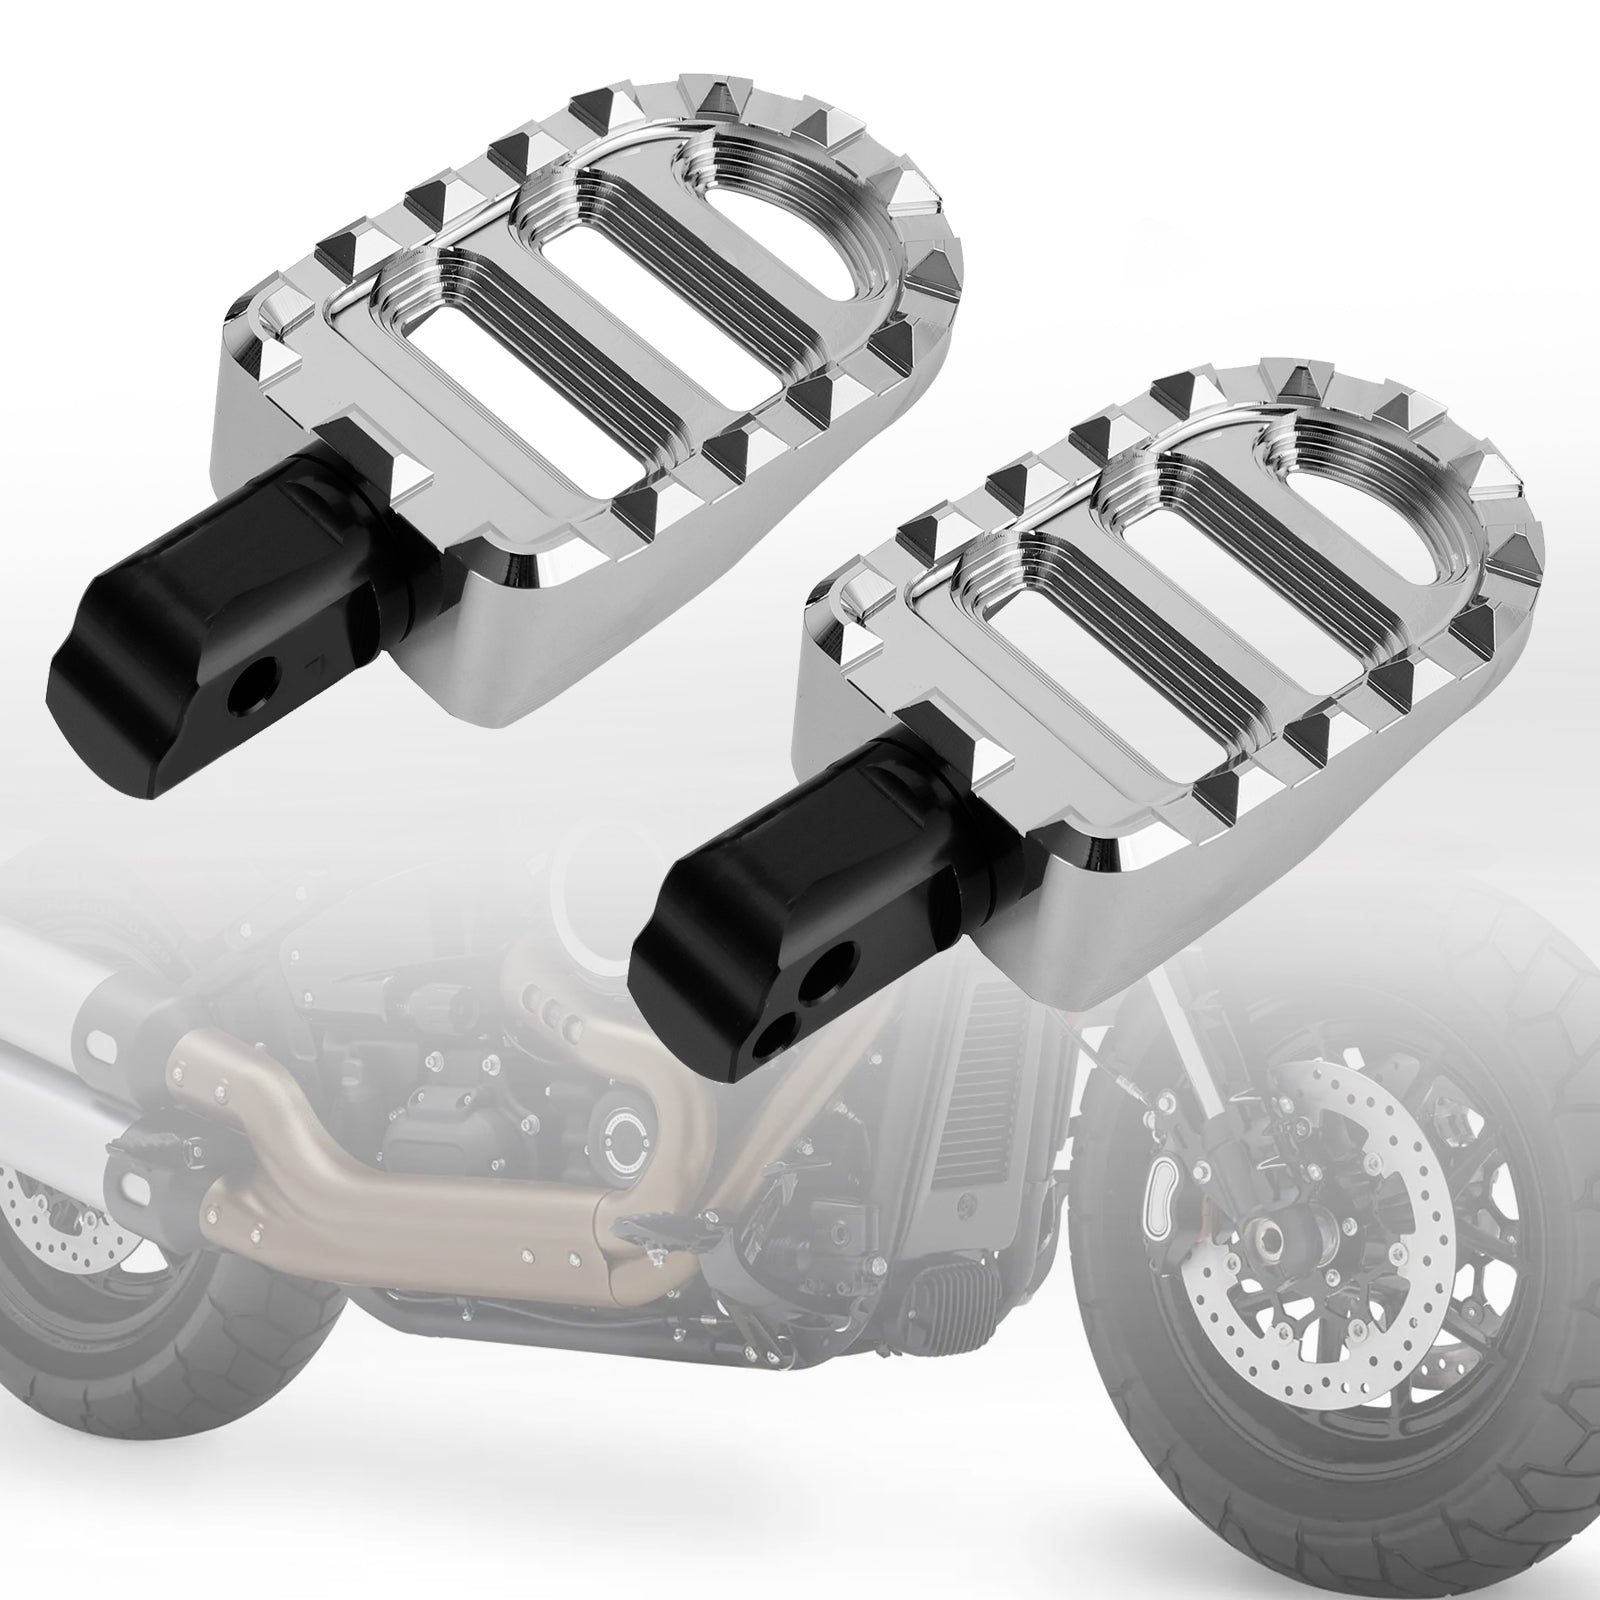 Sportster S Breakout Lower Rider Softail Slim Repose-pieds arrière Repose-pieds